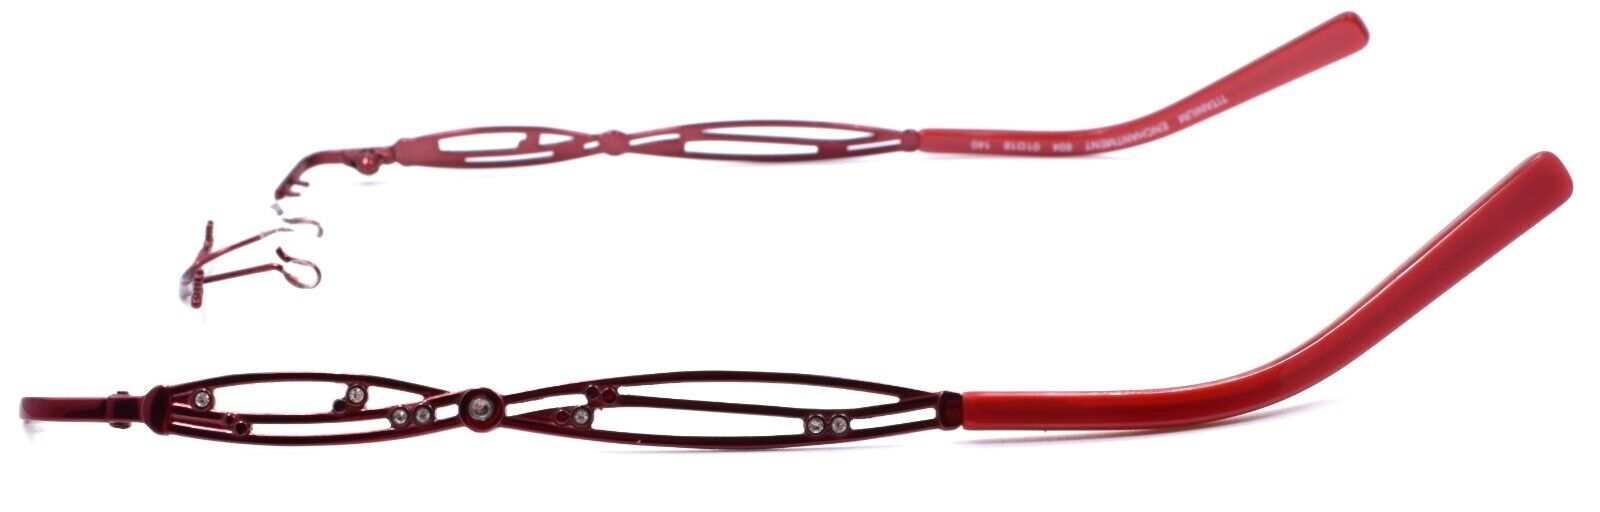 4-Airlock Enchantment 204 604 Eyeglasses Frames Burgundy 18-135 CHASSIS ONLY READ-886895381123-IKSpecs